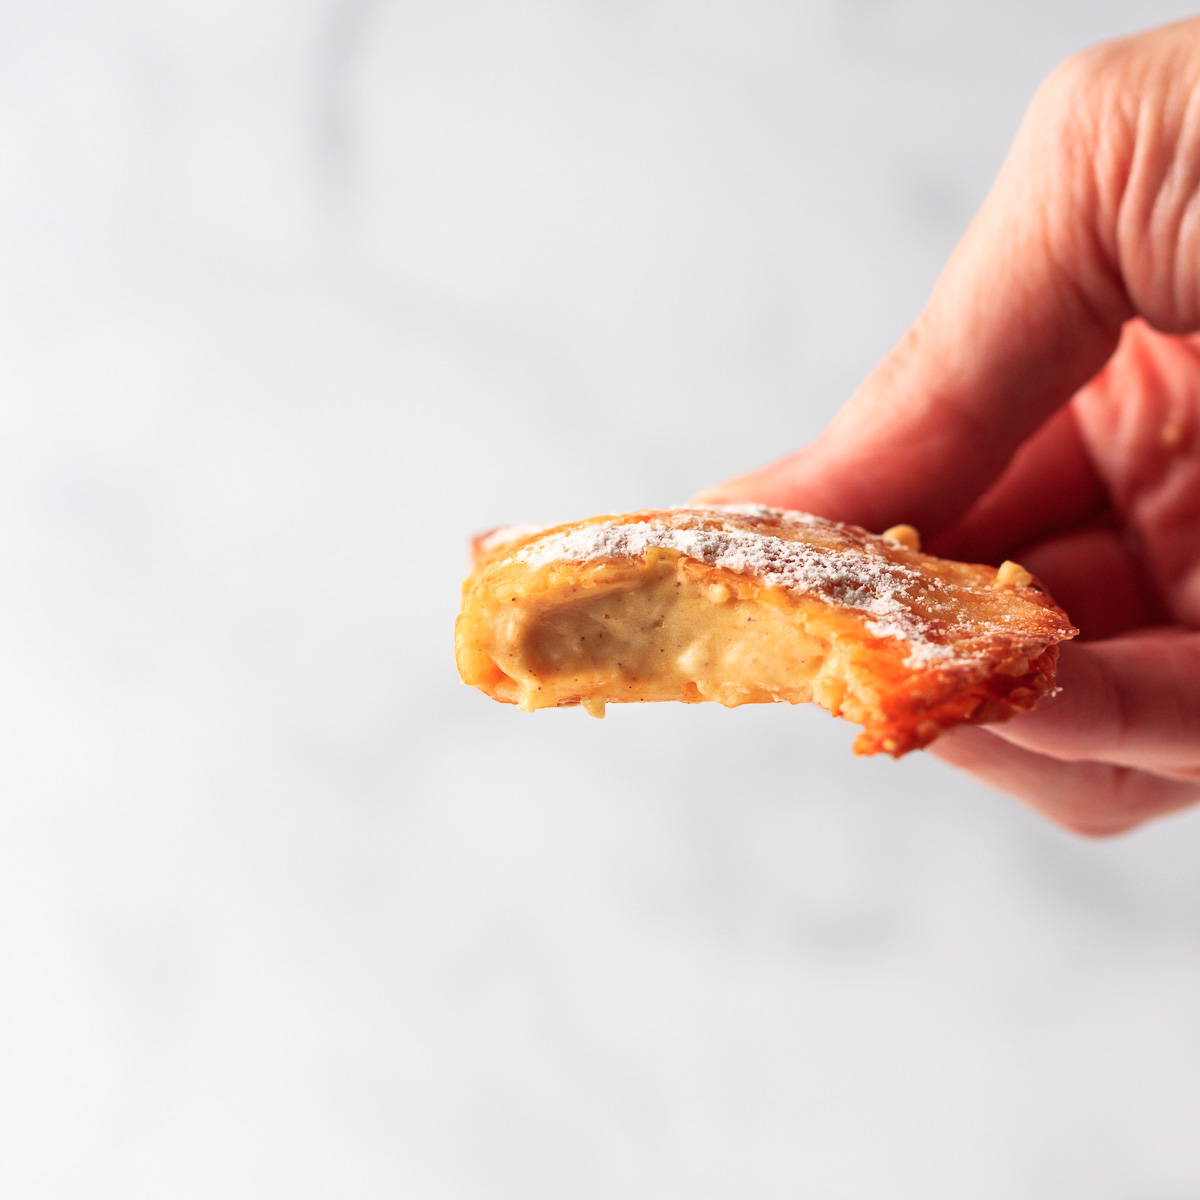 Pumpkin turnover with a bite out of it.